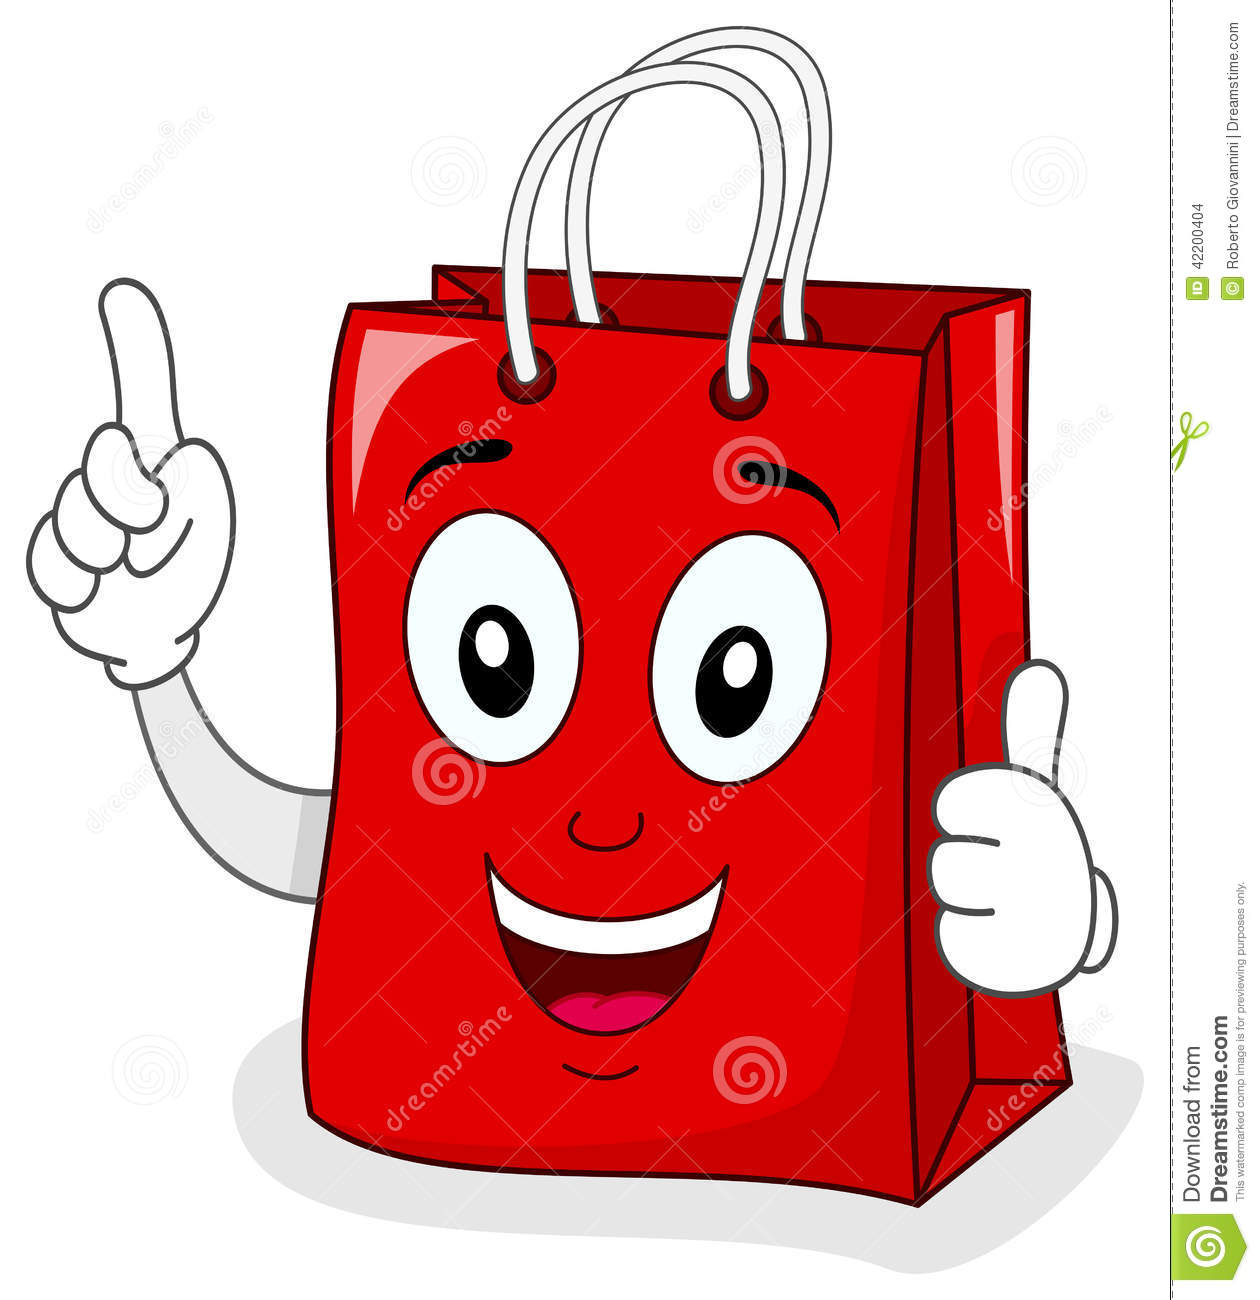 Cartoon Character with Shopping Bag